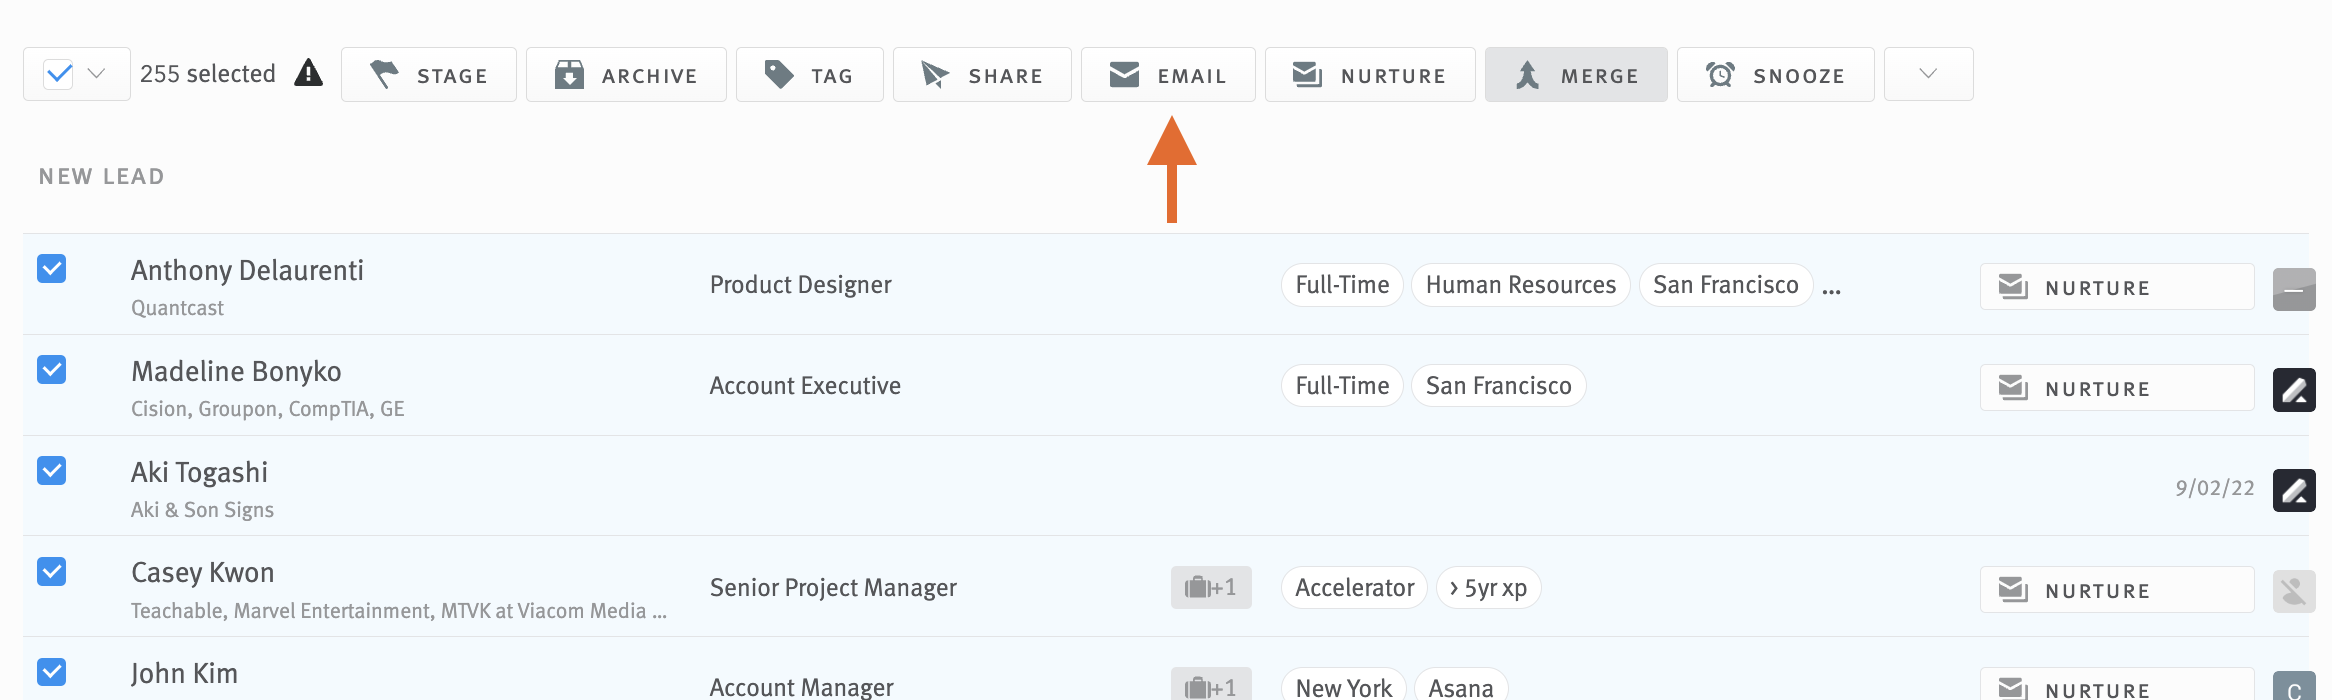 Opportunities list with arrow pointing to email button